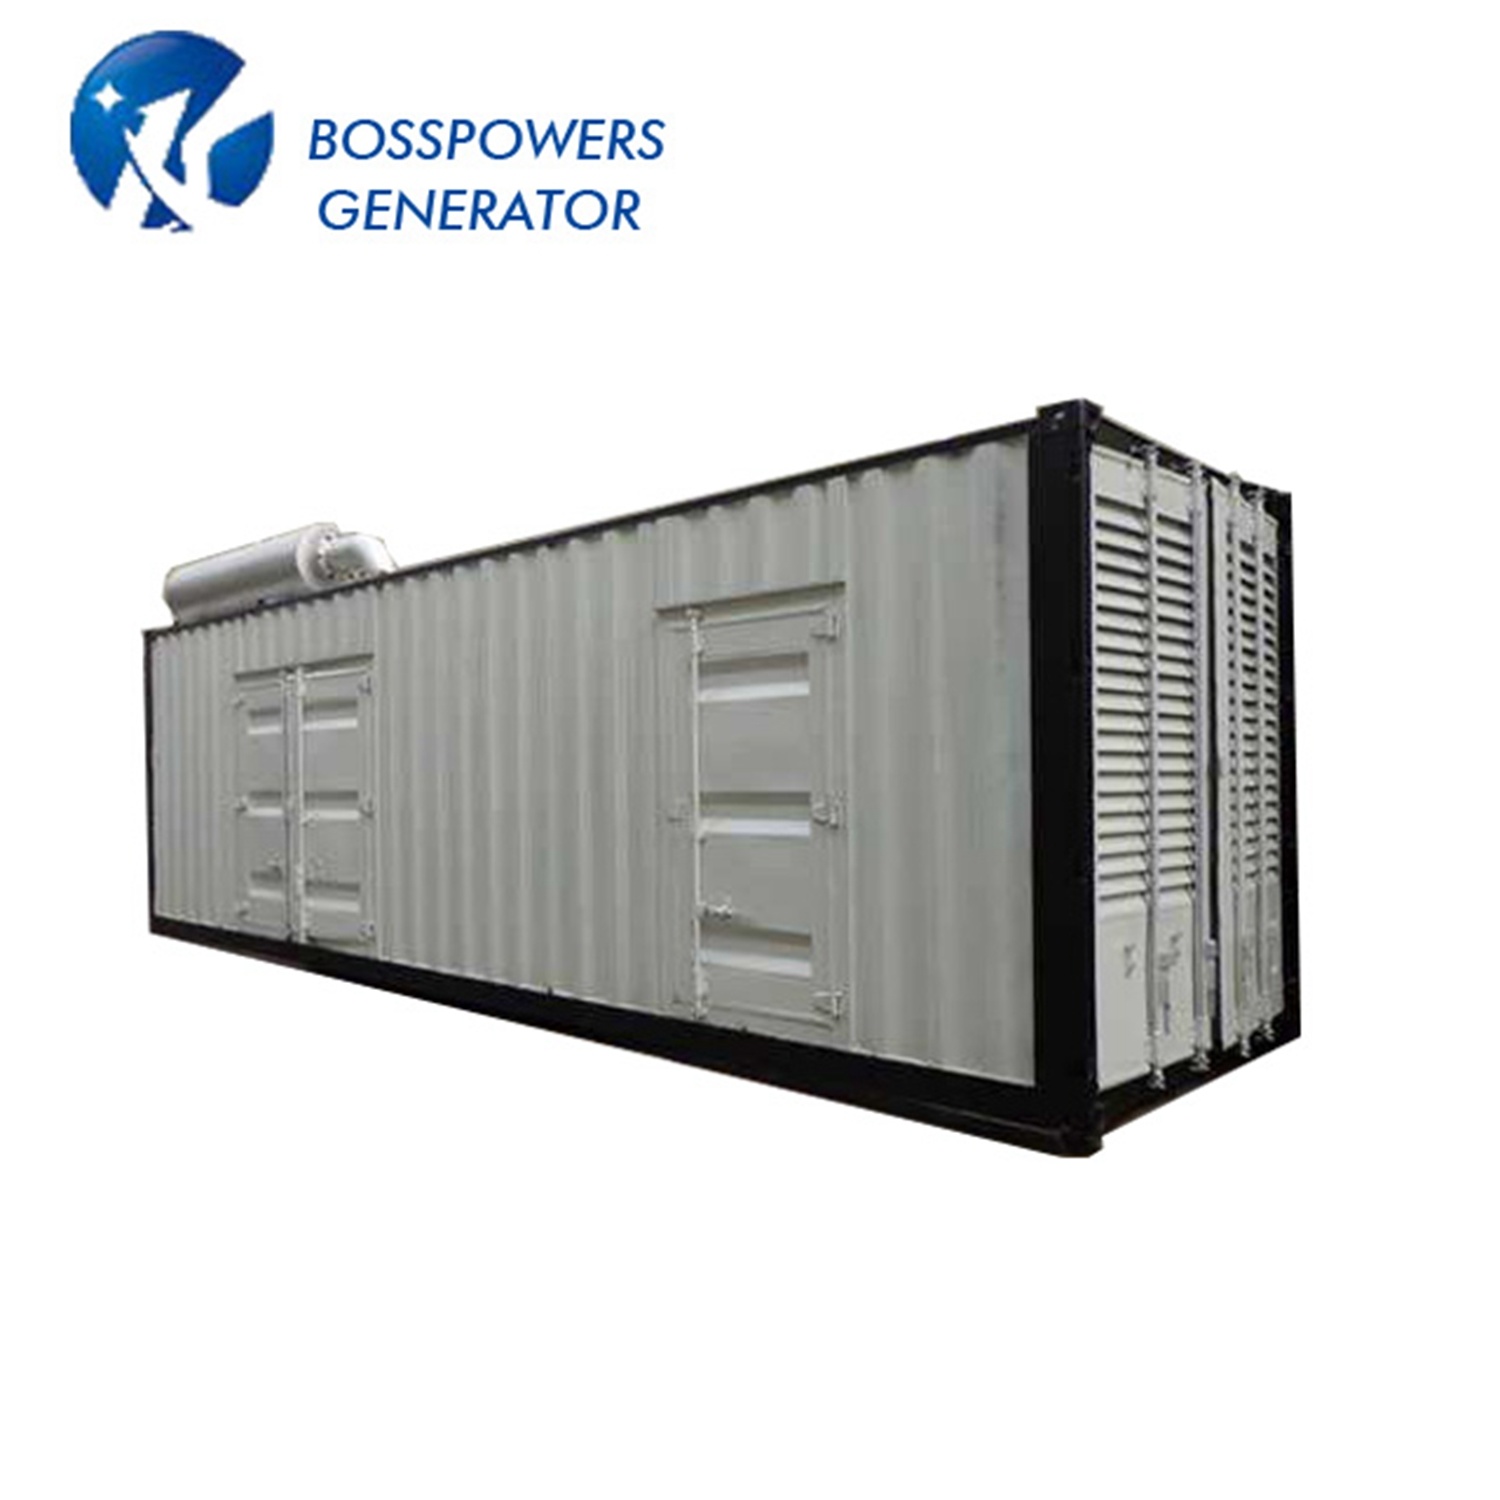 1800kw 2250kVA Prime Power Standby Generator Powered by 4016-61trg3 E